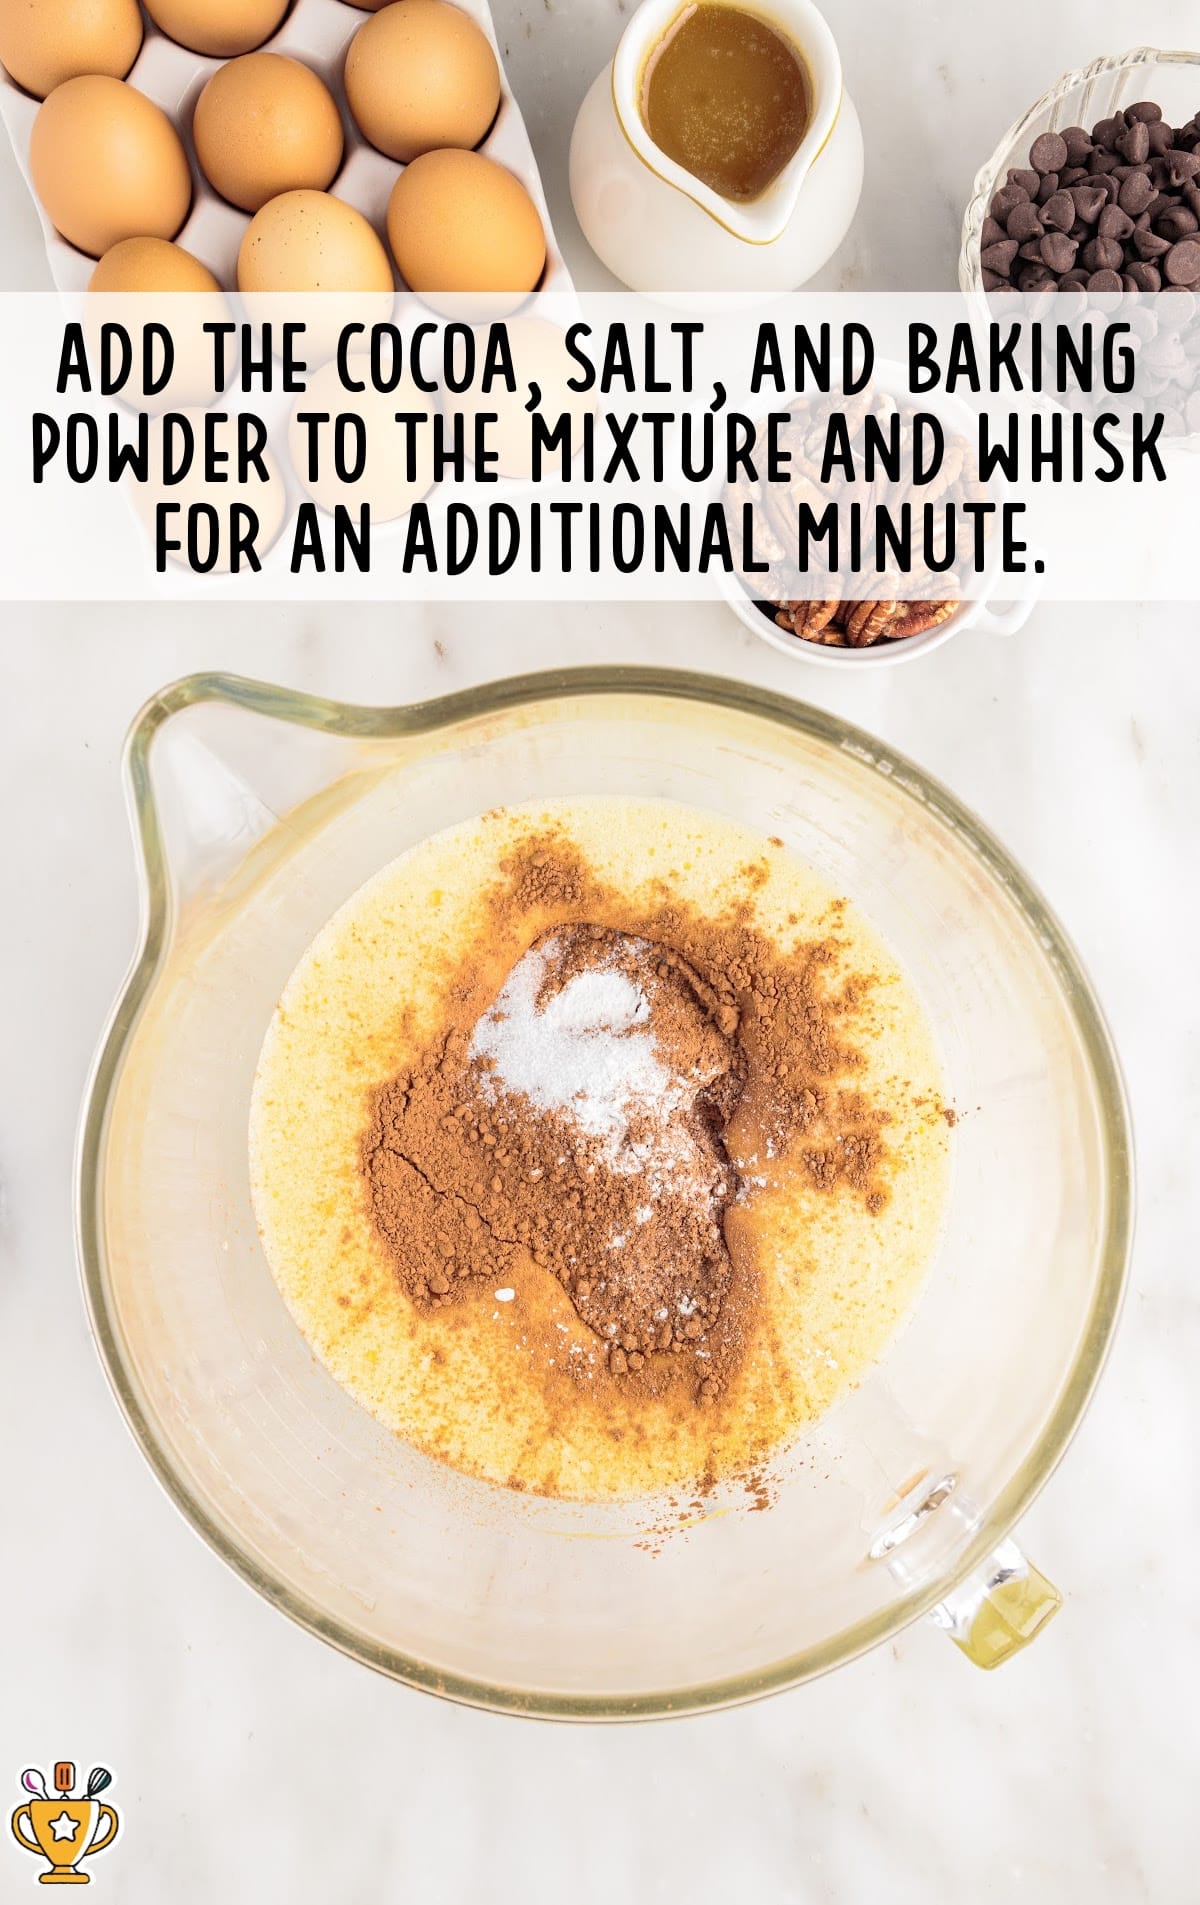 cocoa, salt, and baking powder added to the mixture